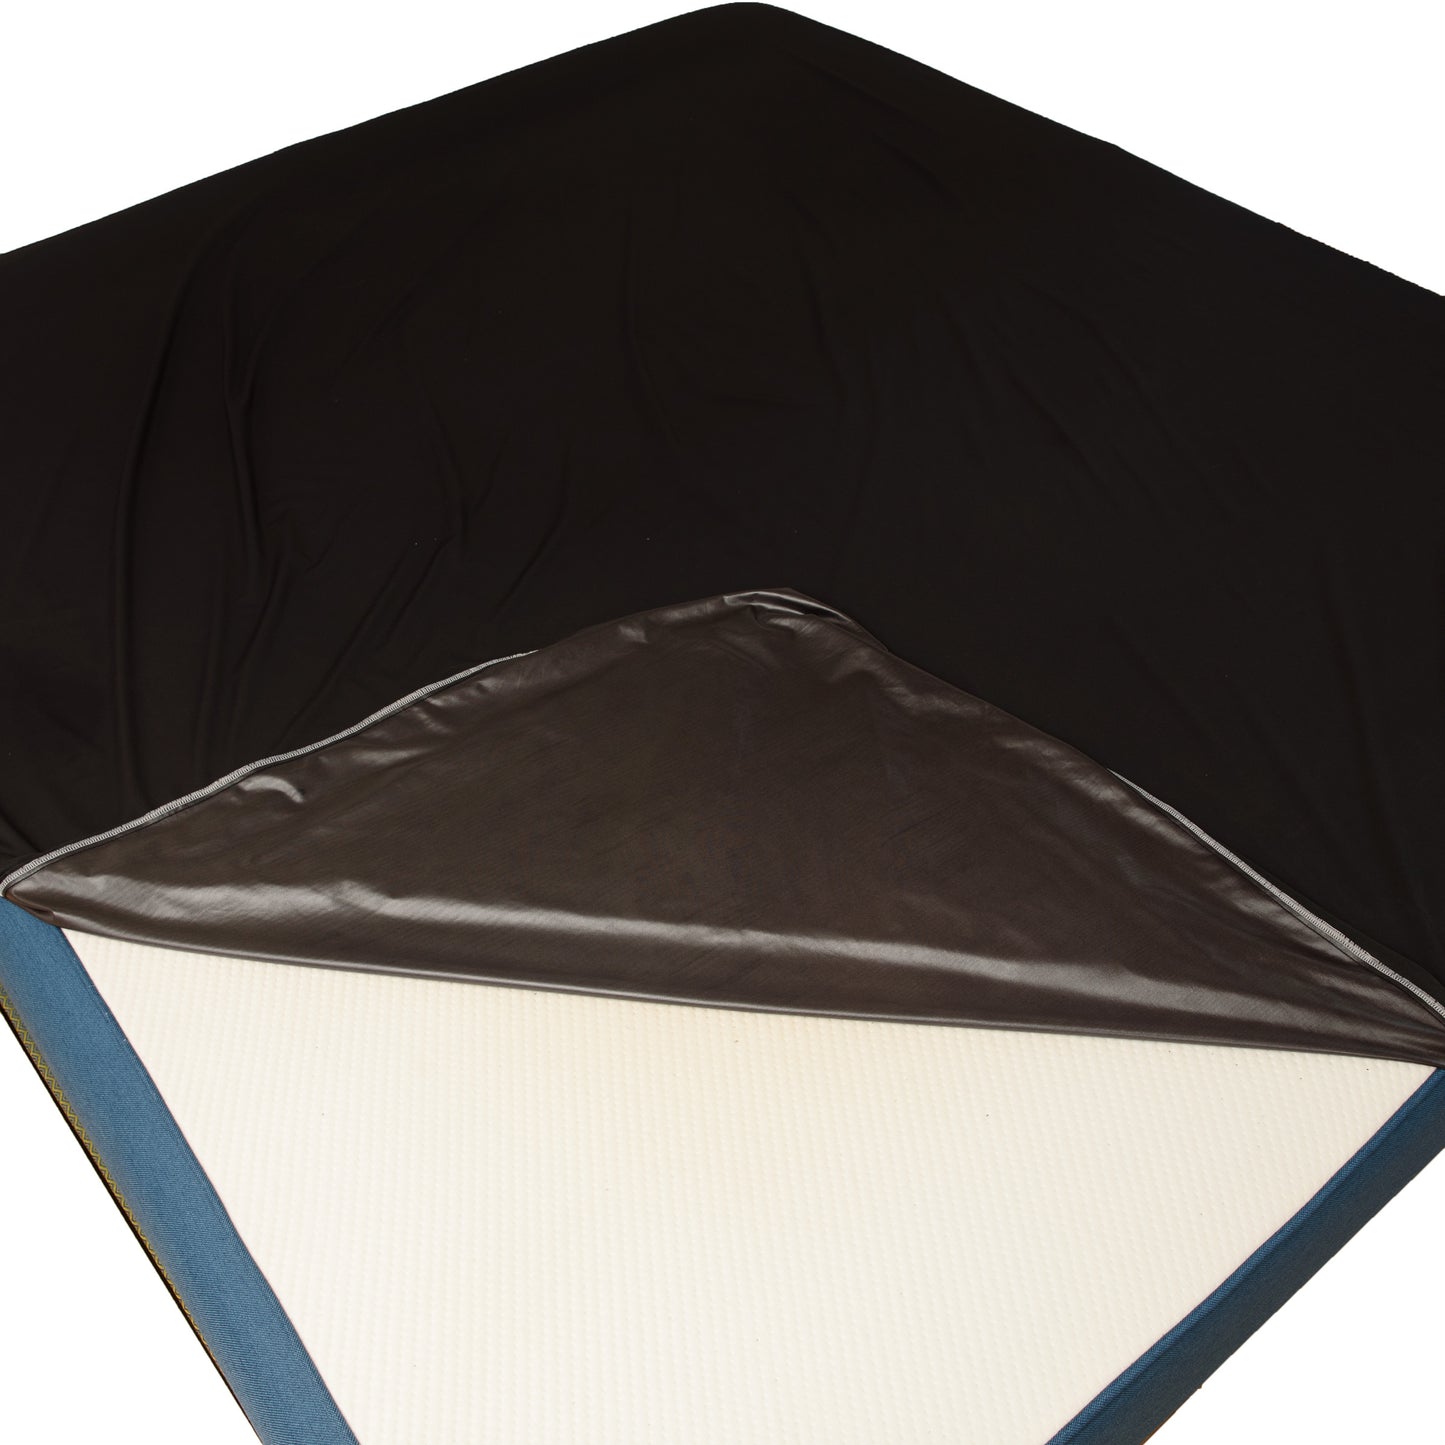 Black Waterproof Fitted Sheet KING - Just for you desires